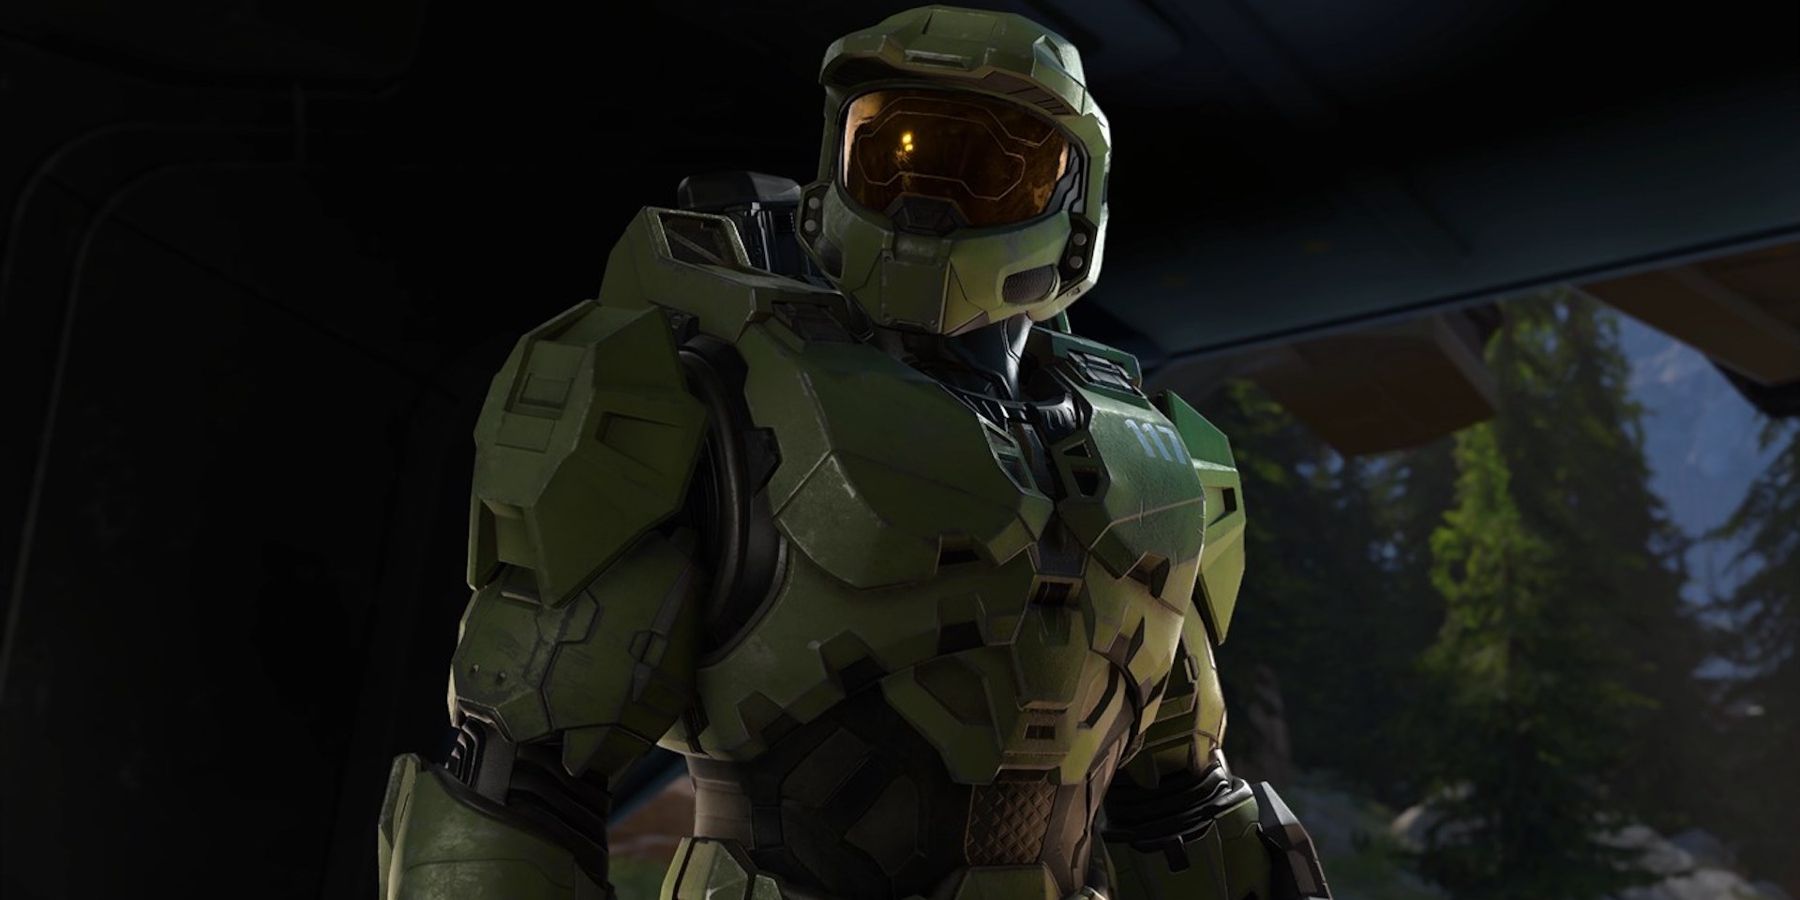 Halo Infinite Video Shows How Much Stronger Master Chiefs Armor Has Gotten